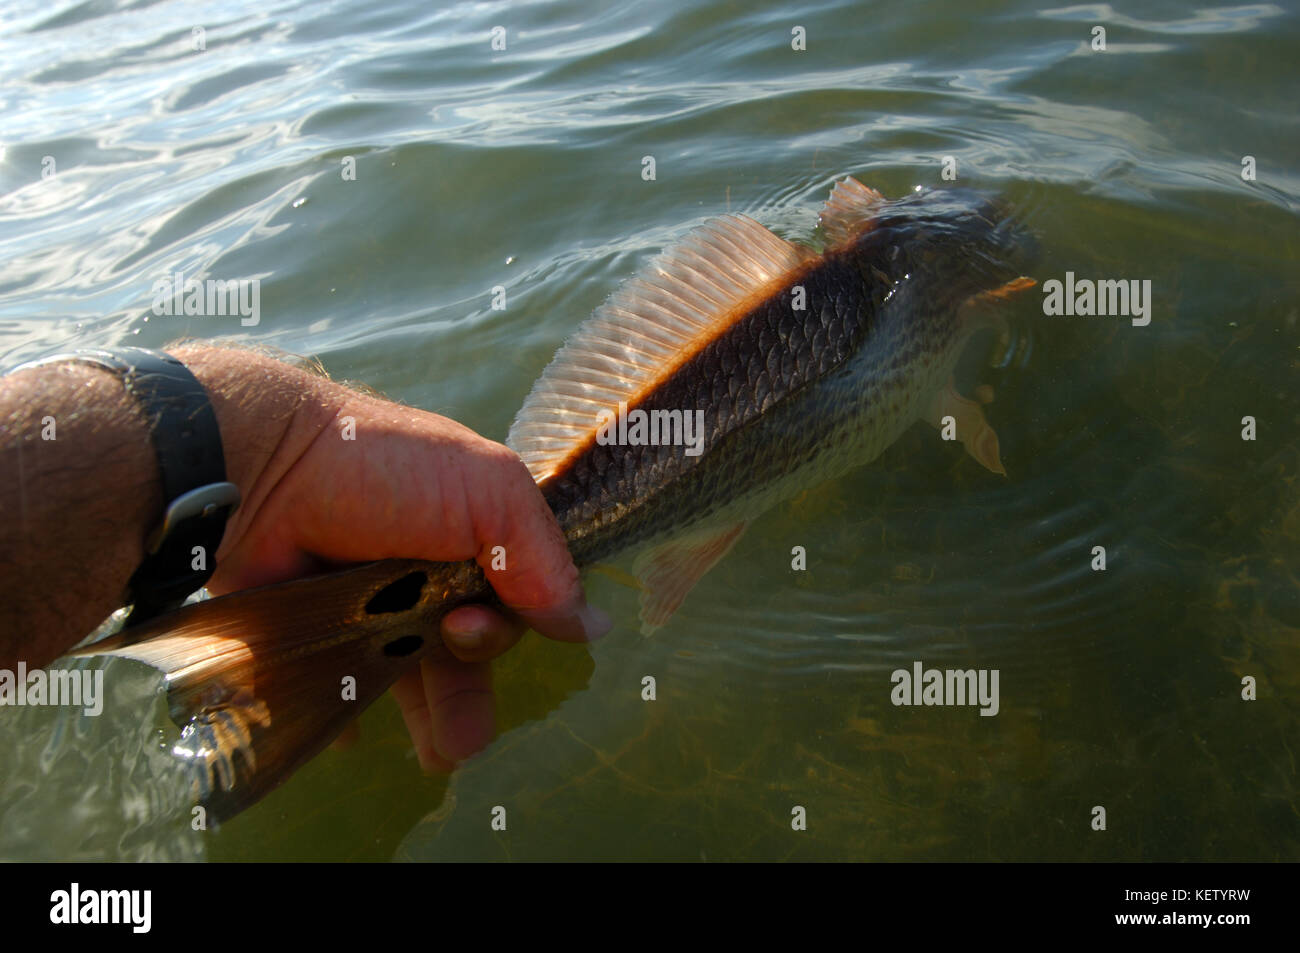 A red fish or red drum caught while fly fishing the shallow flats near Port Aransas, Texas Stock Photo